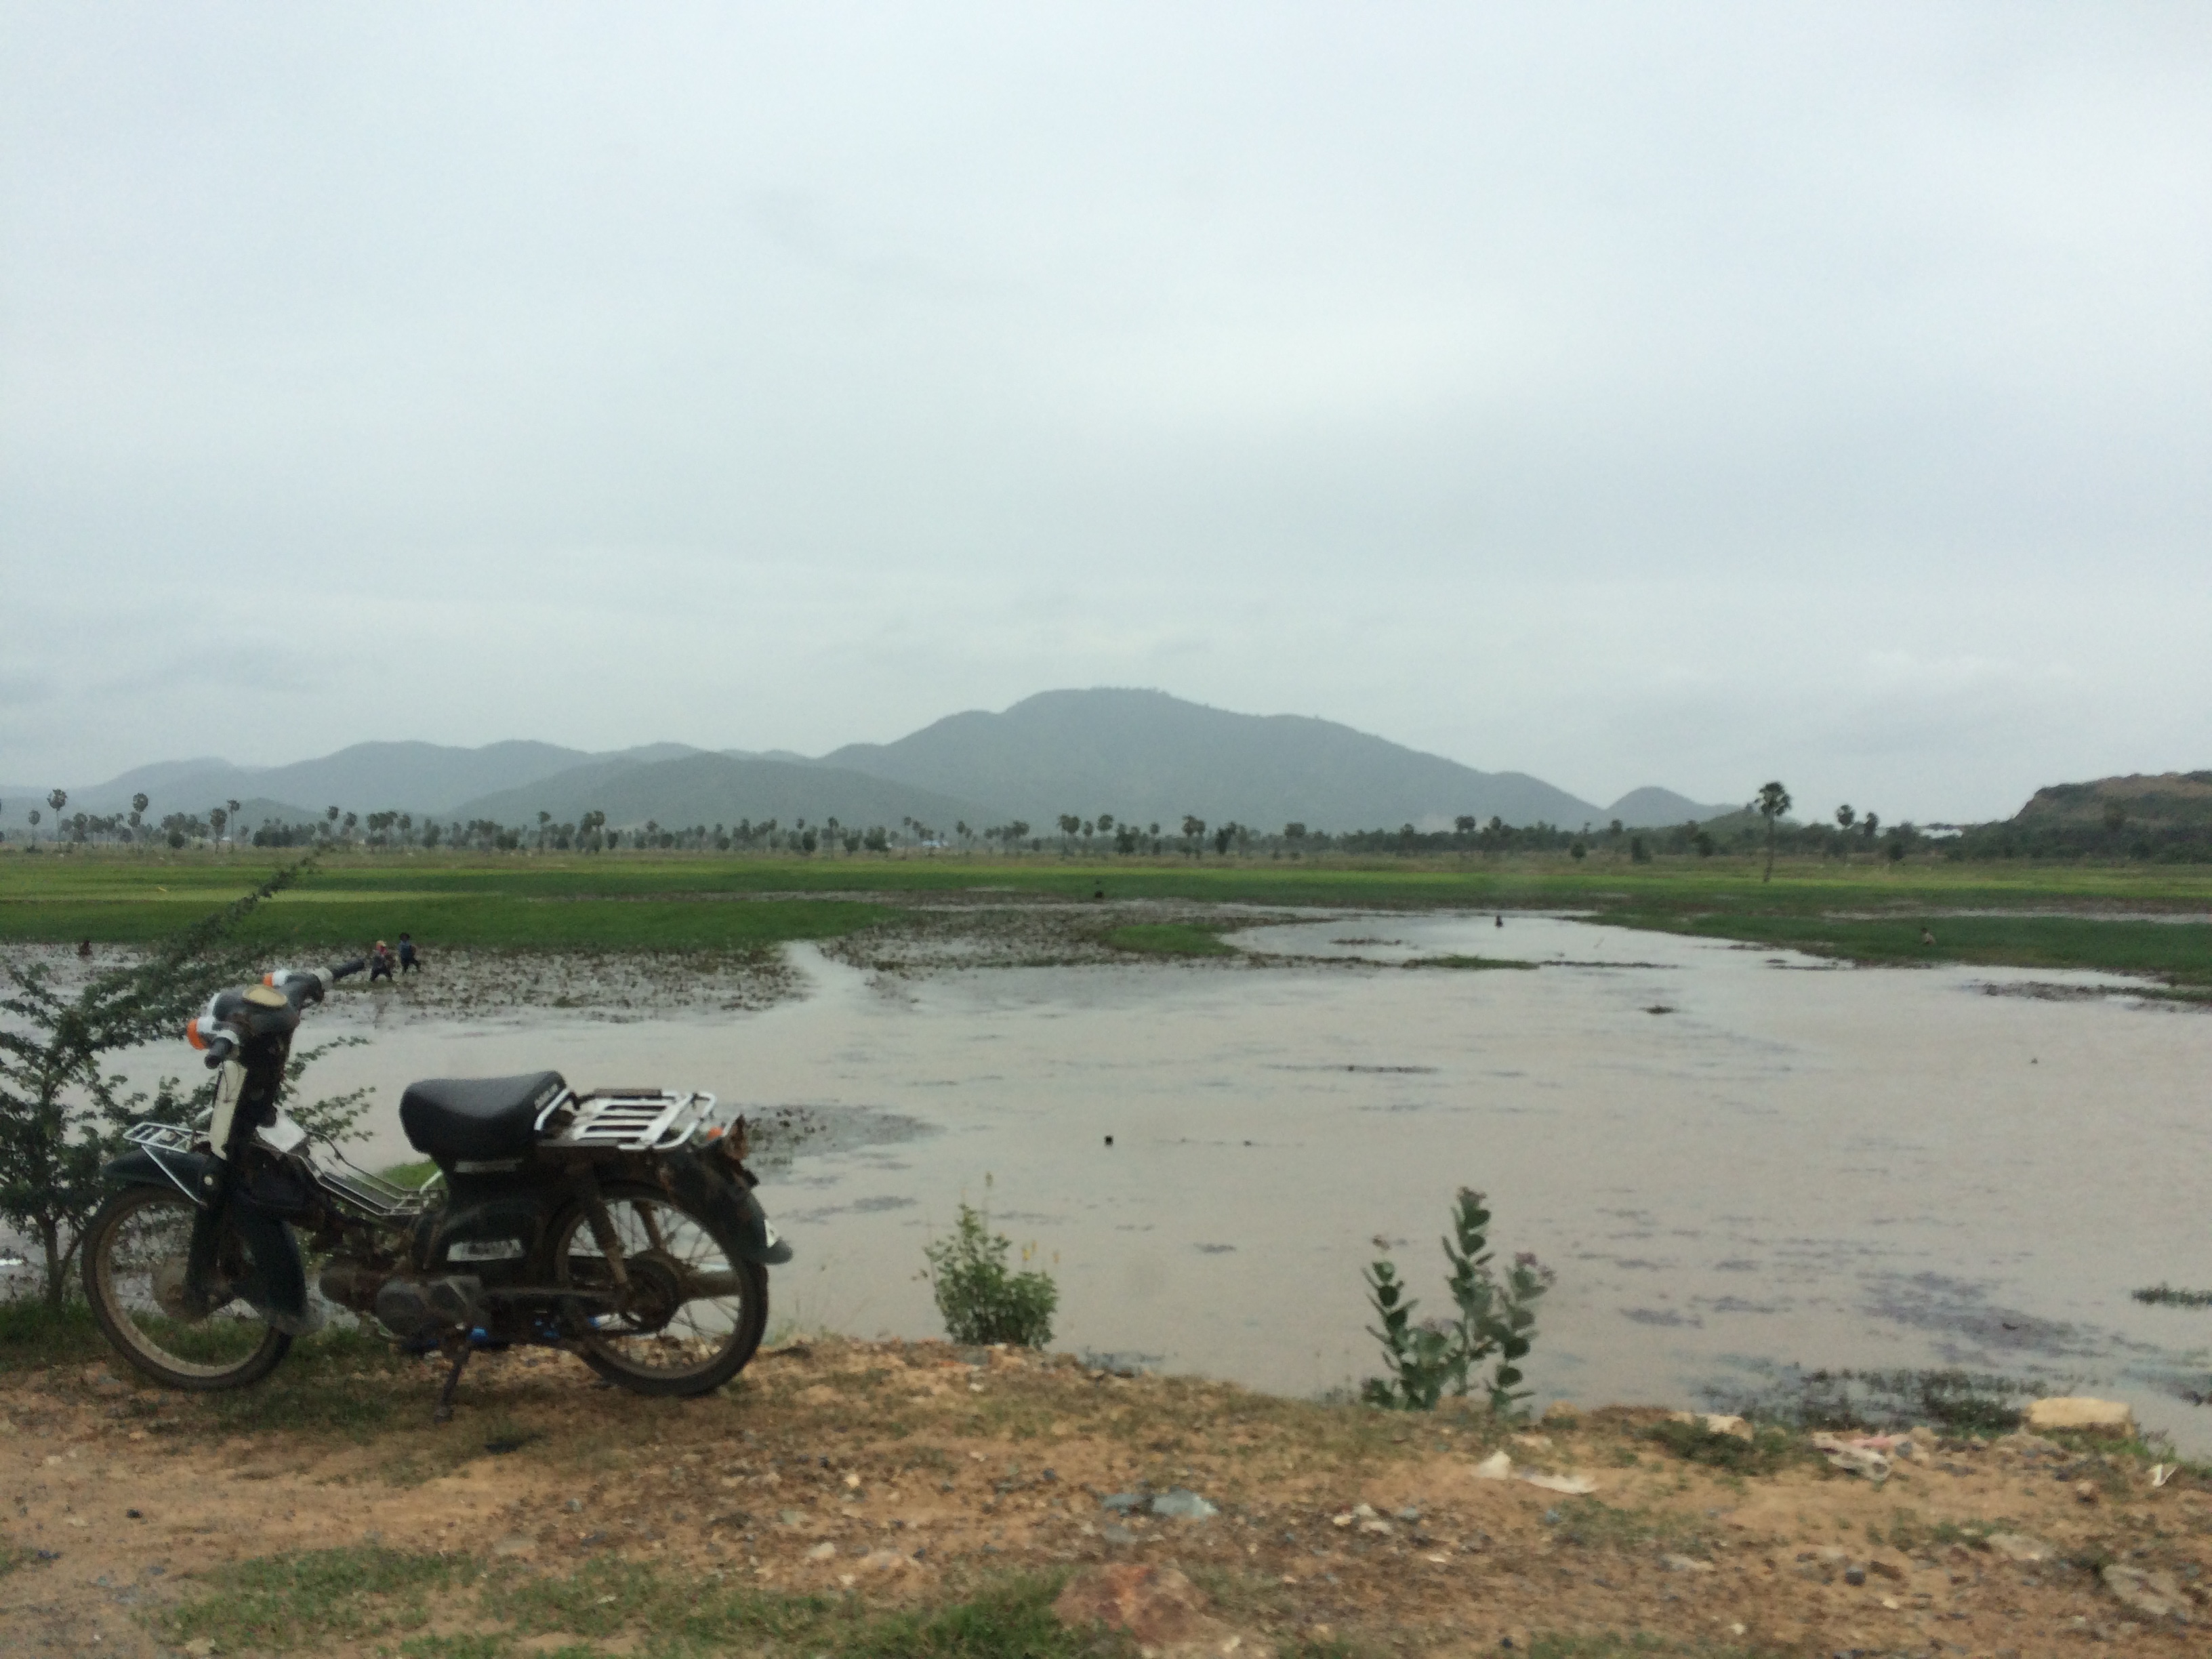 Scenery on the way to Kampong Speu